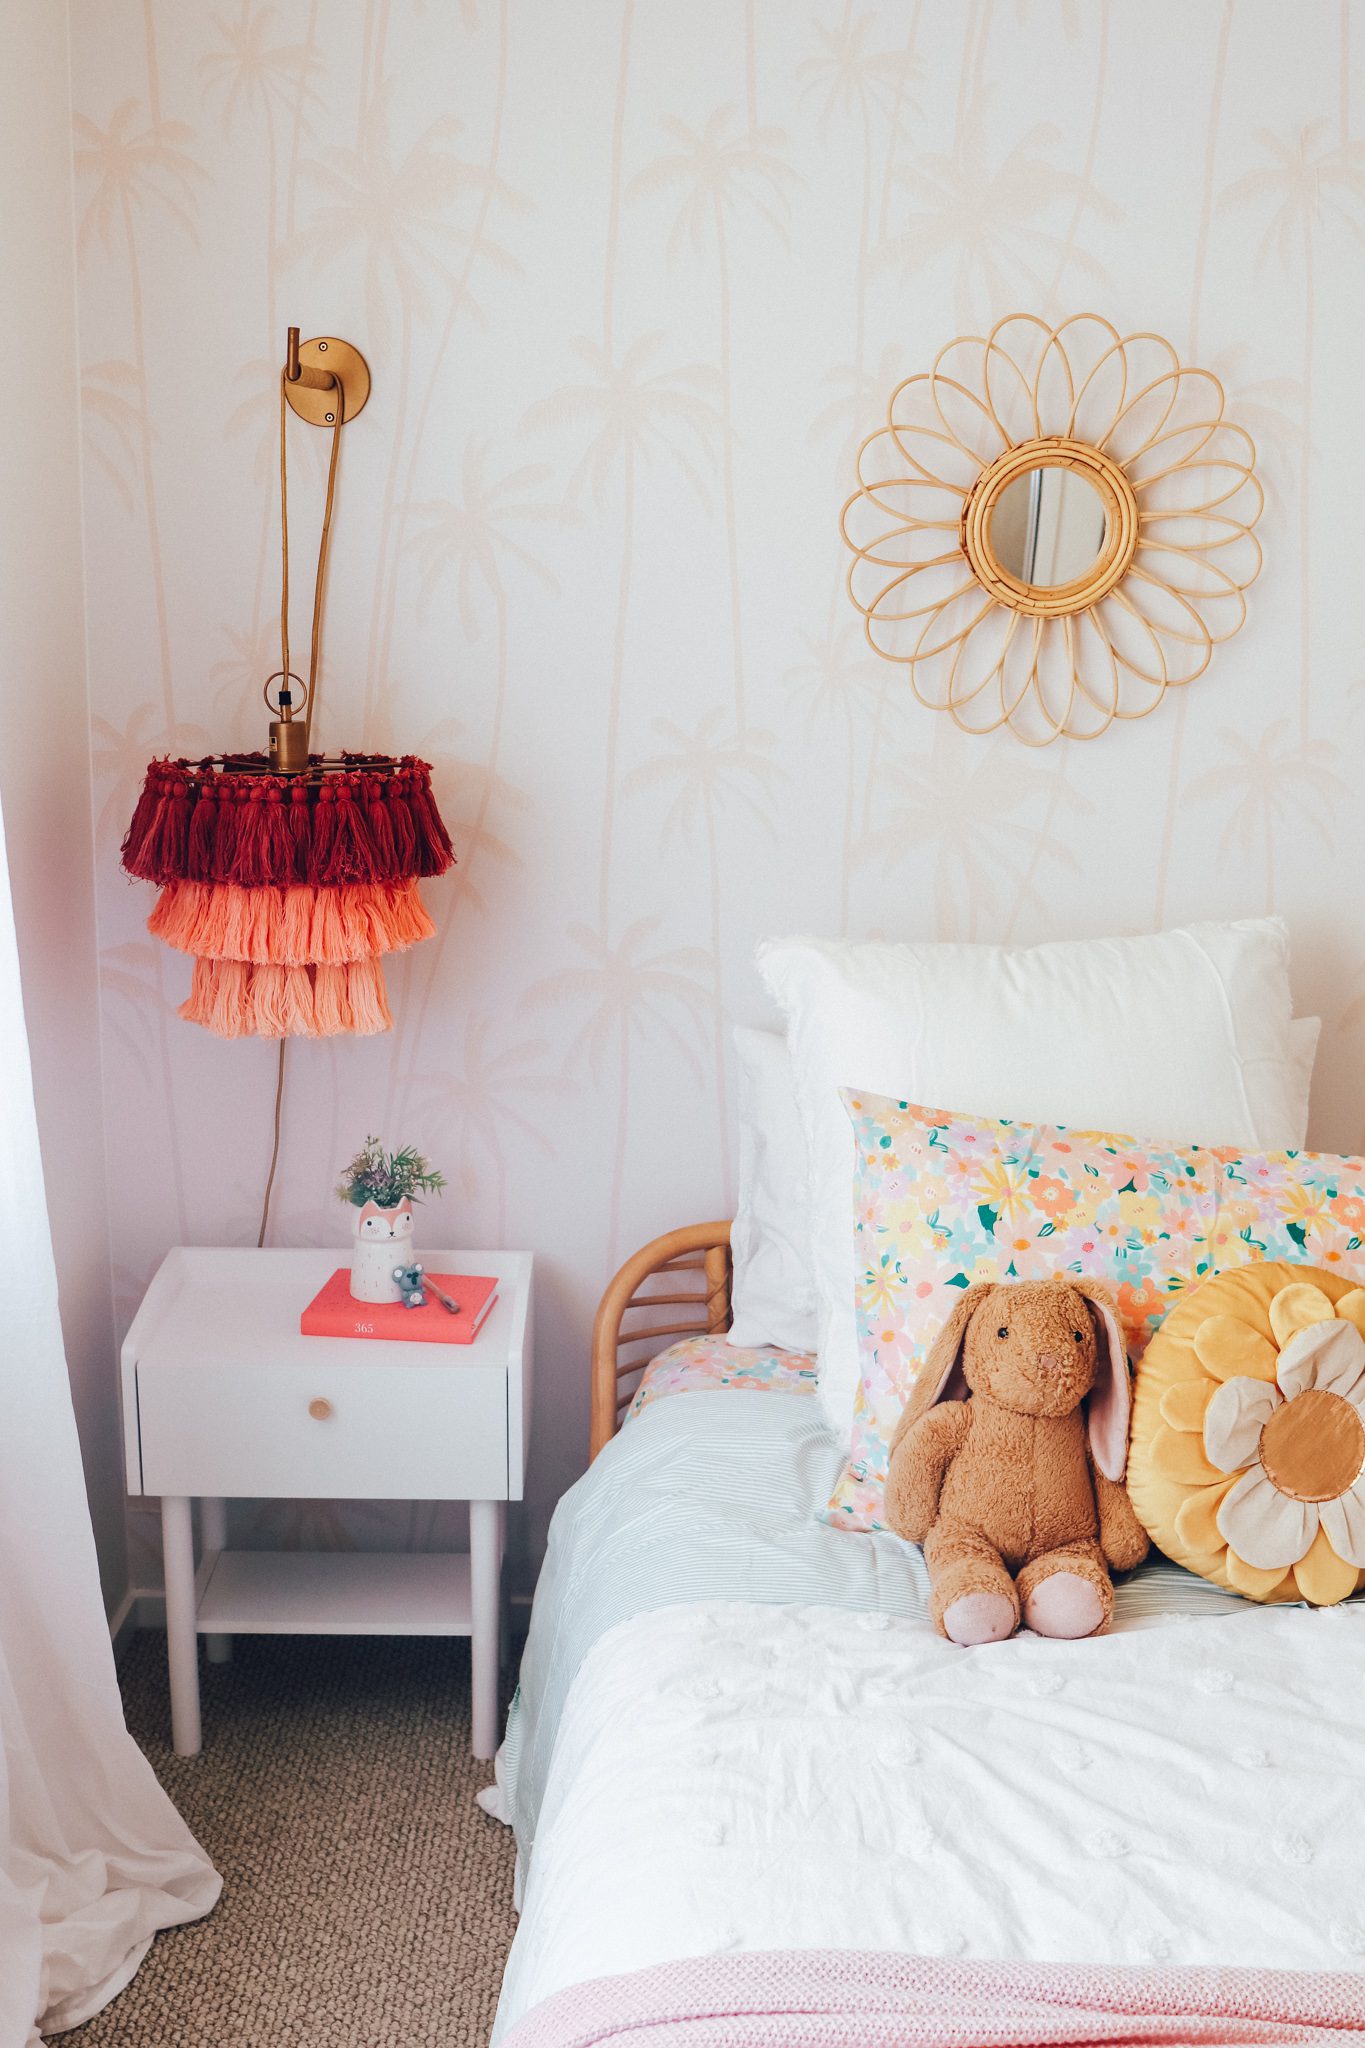 Lucy Long Healthcare: Lulu gets a new bedroom makeover!